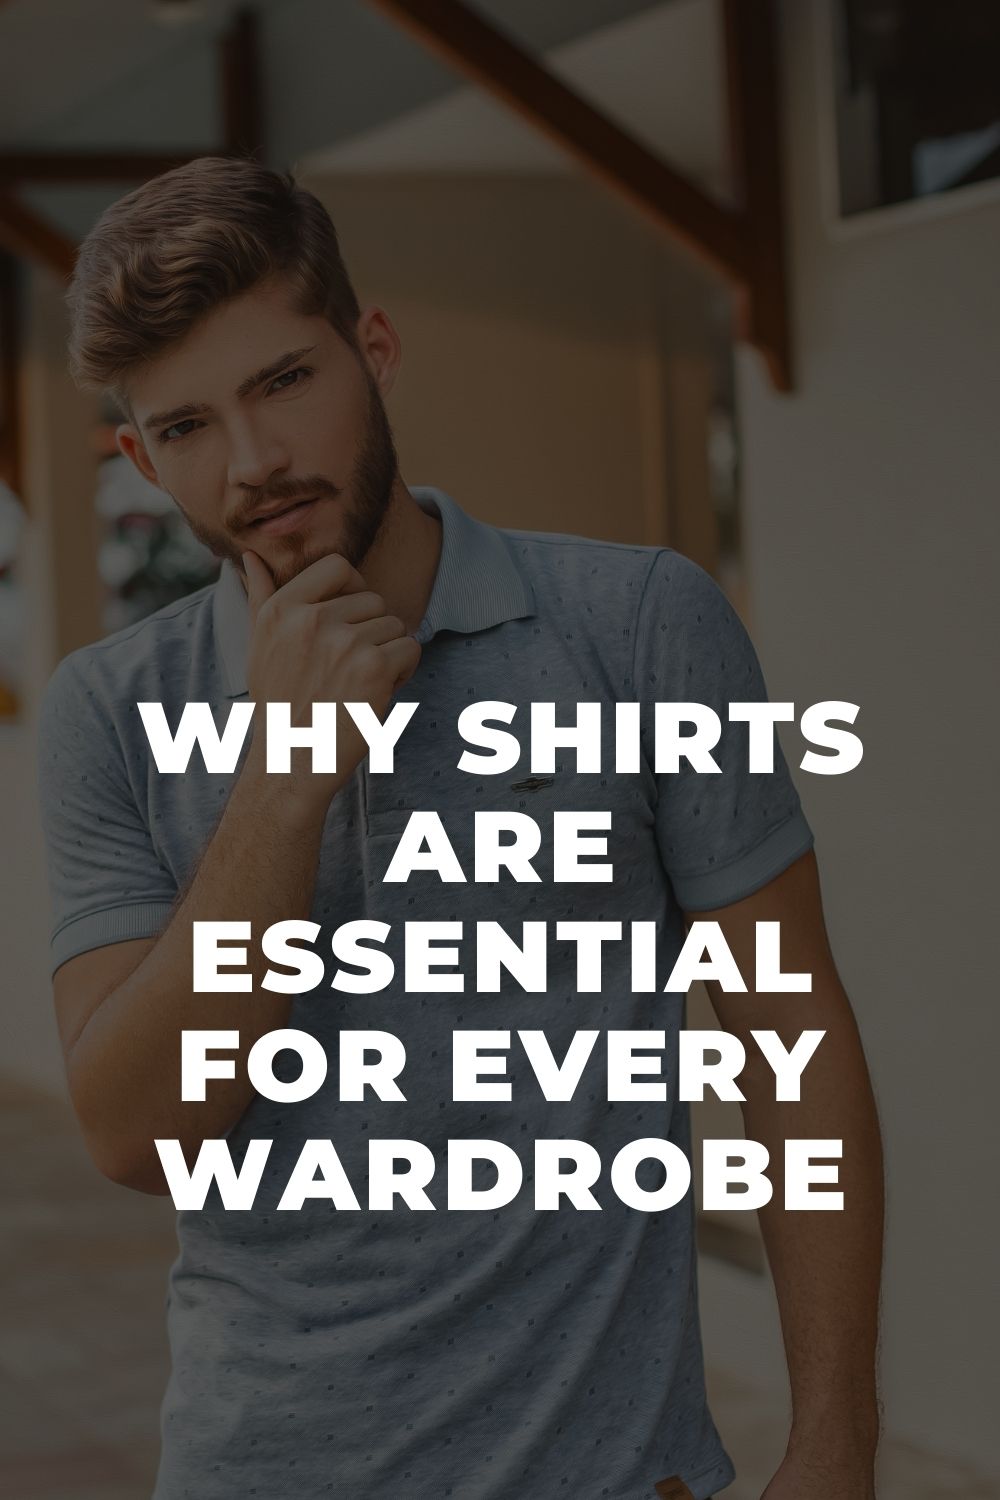 Why Shirts Are Essential for Every Wardrobe